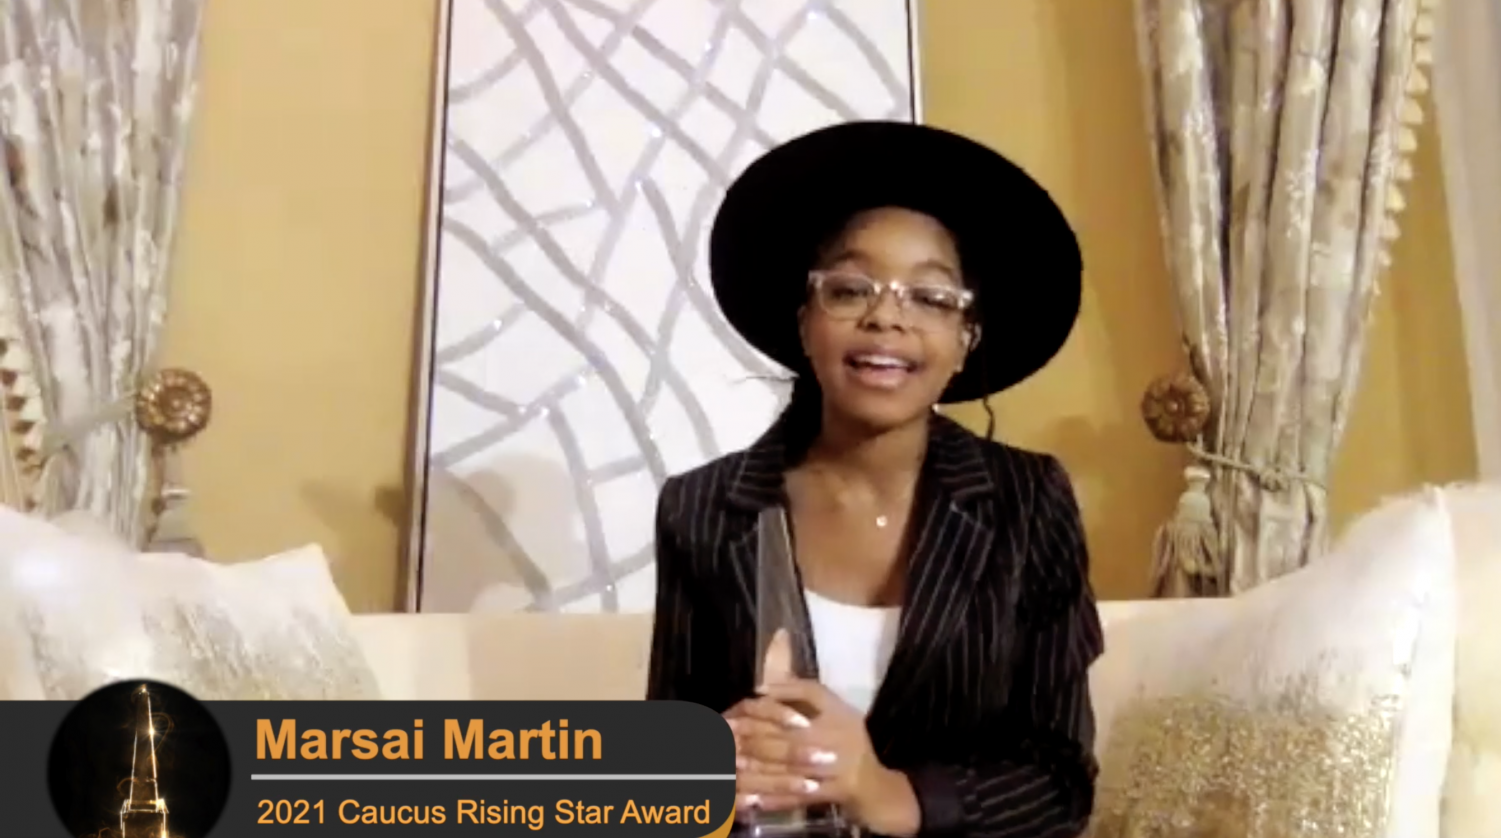 Marsai Martin accepts the Rising Star Award on March 4, 2021 over Zoom during the 38th Annual Caucus Award show.